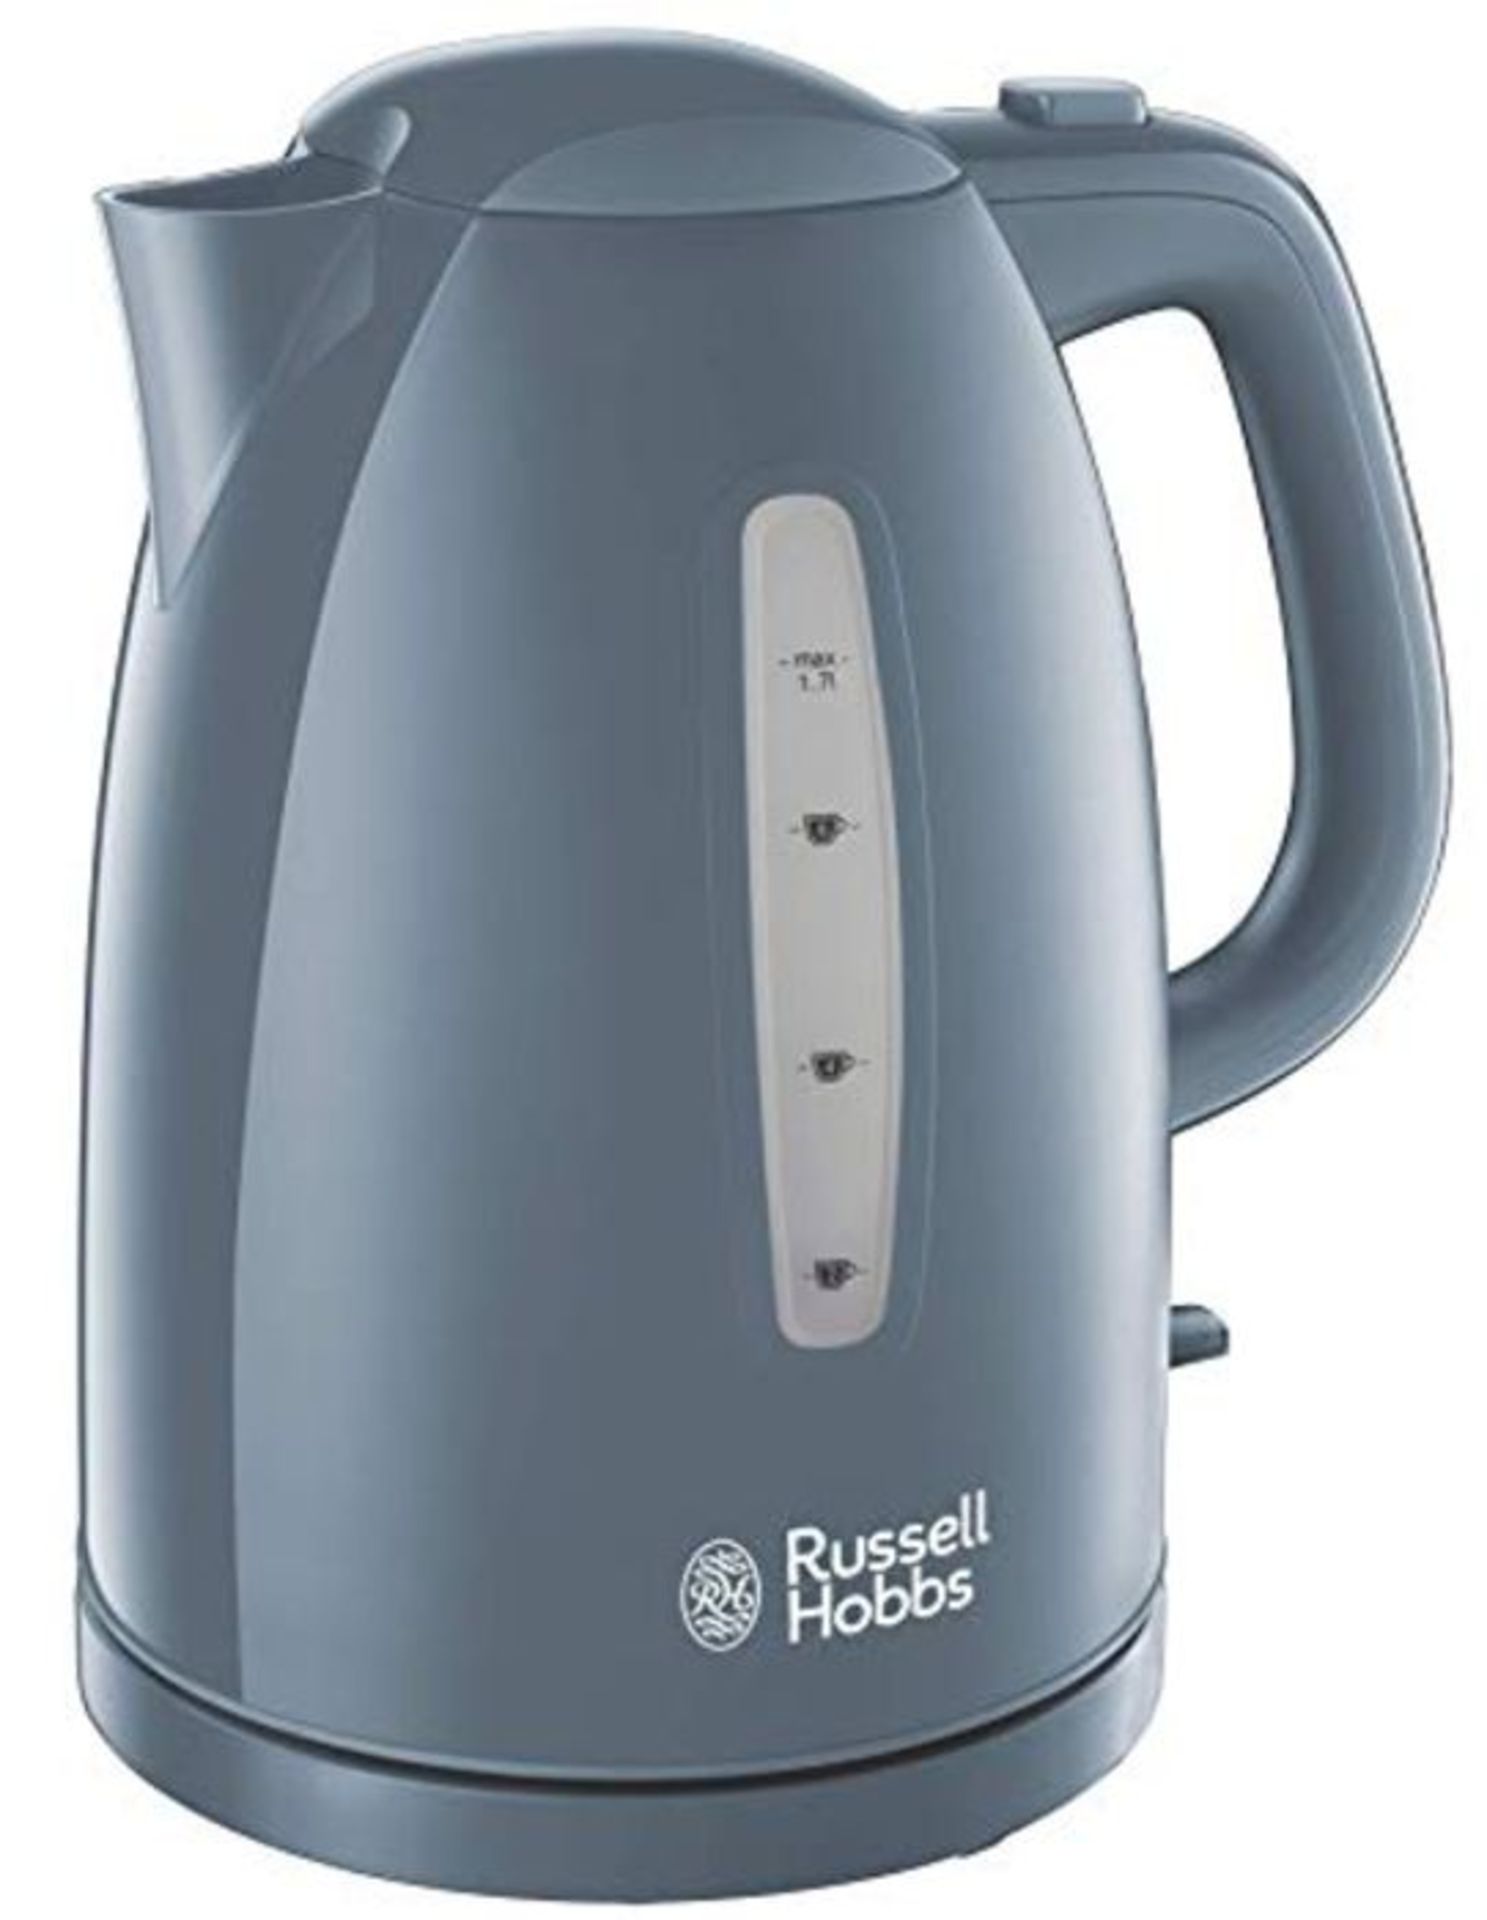 Russell Hobbs 21274 Textures Electric Kettle with Rapid Boil and Perfect Pour Spout, 1